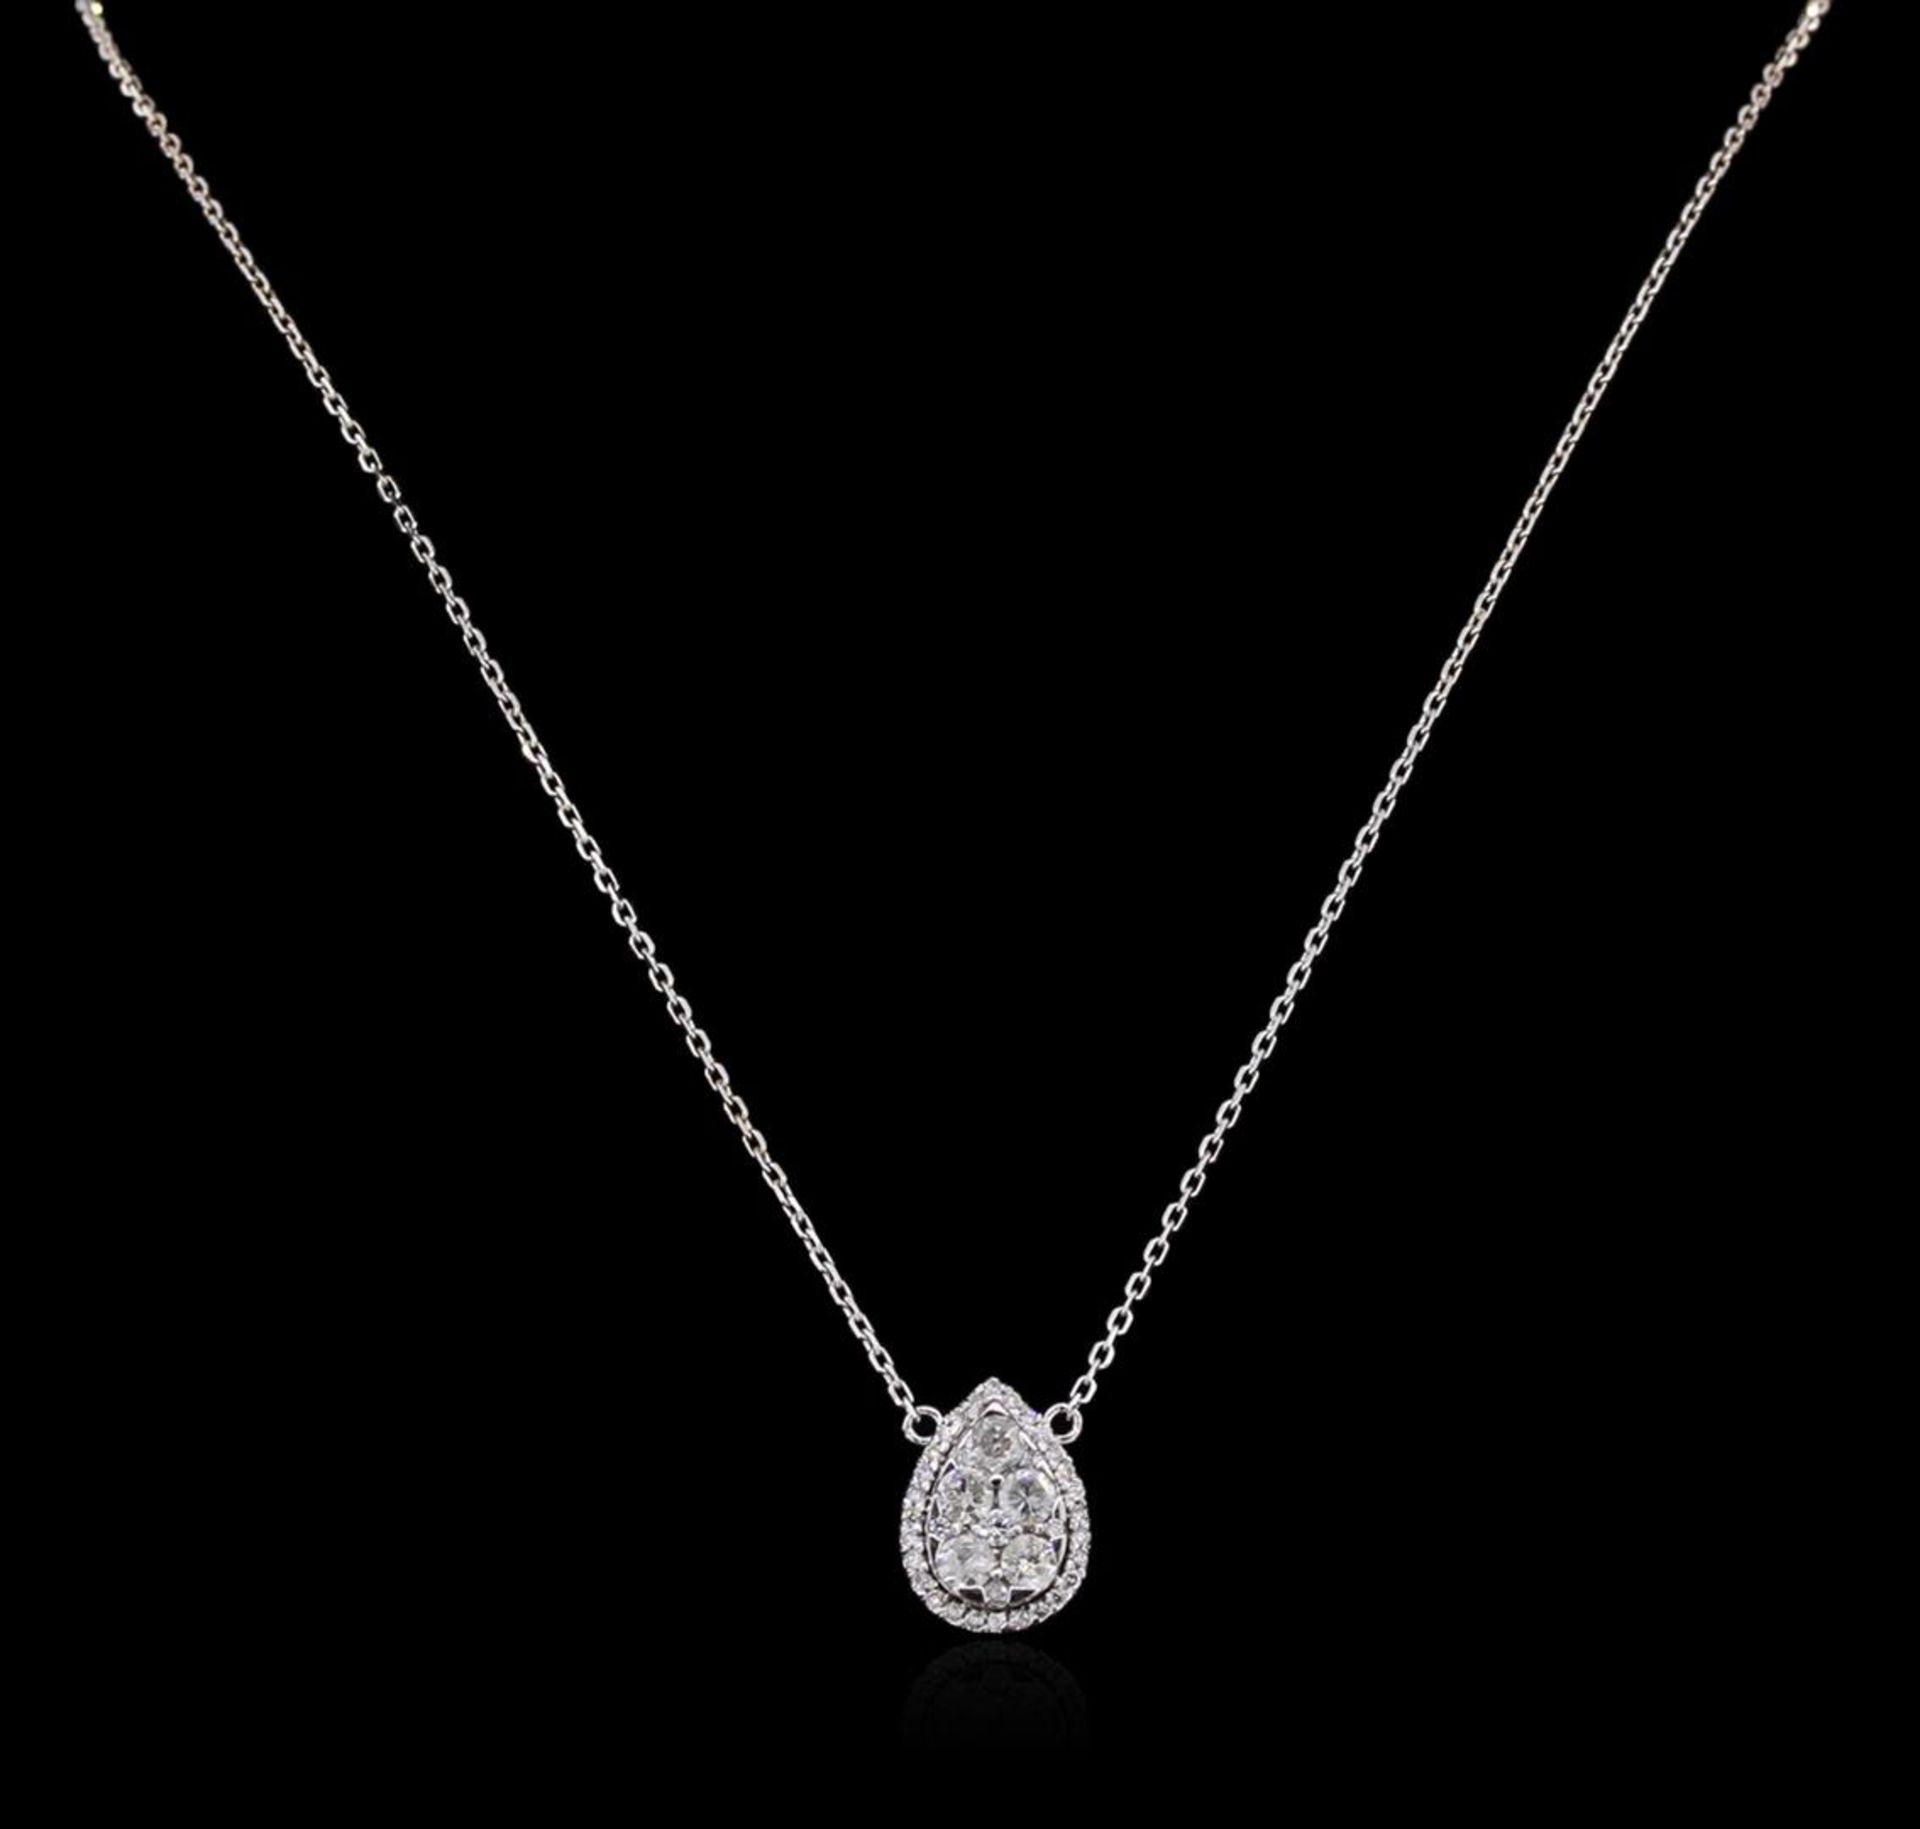 14KT White Gold 0.85 ctw Diamond Necklace - Image 2 of 3